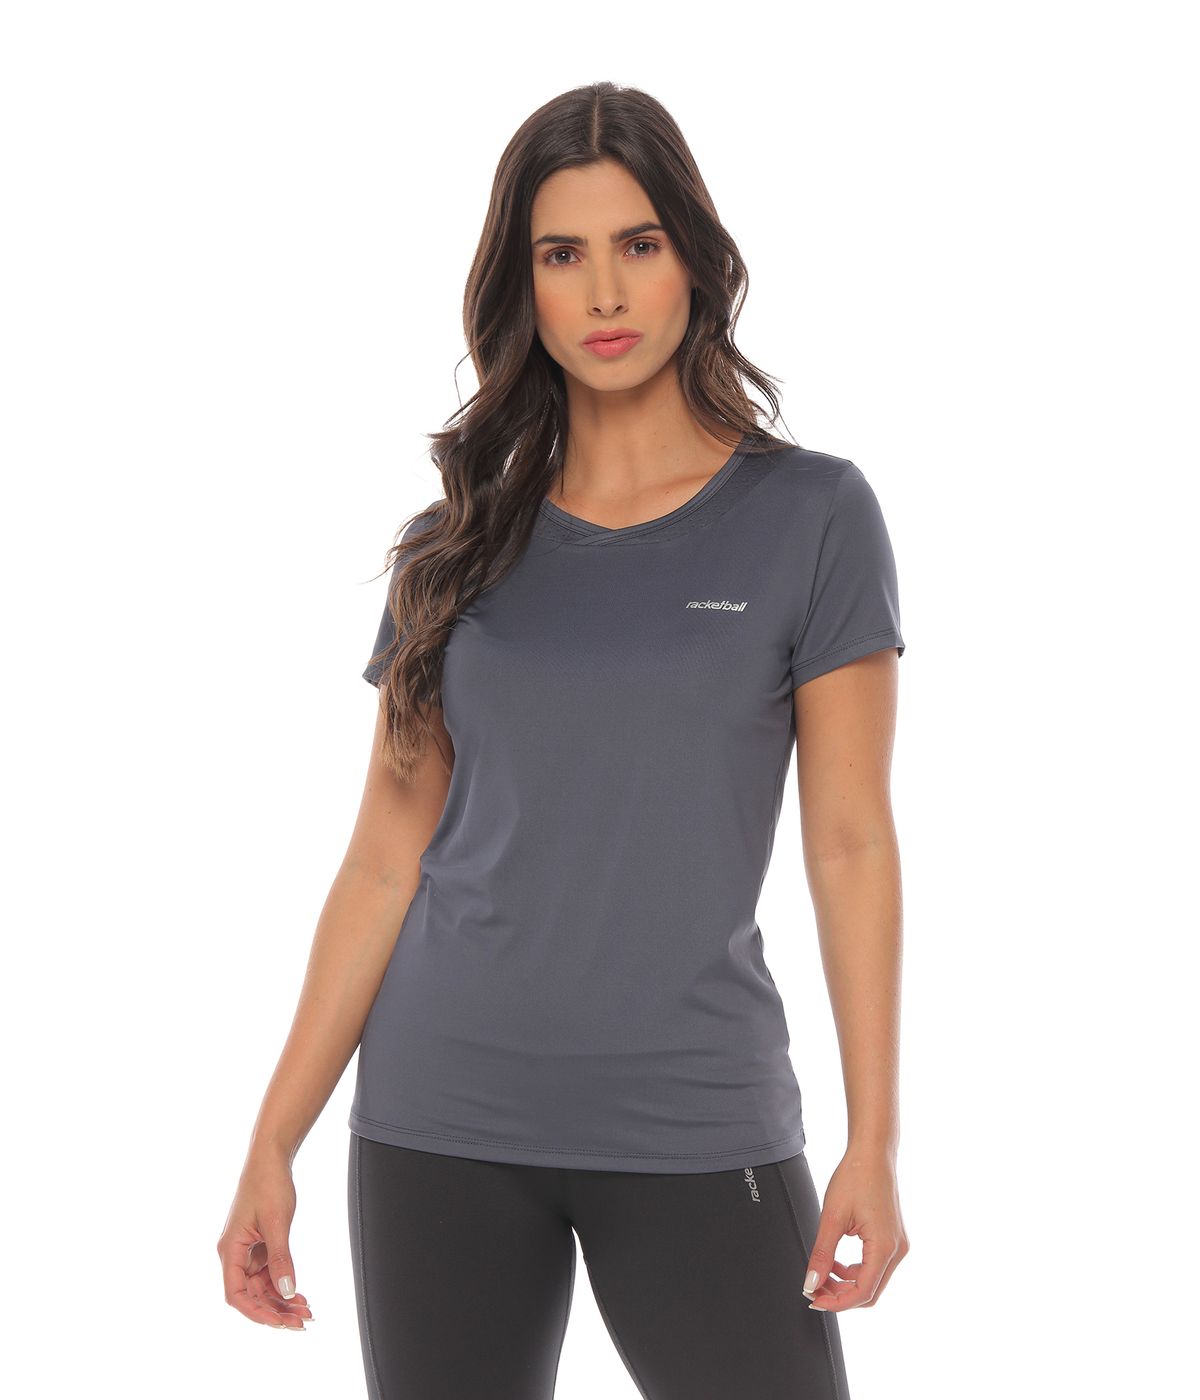 deportiva mujer, color gris - racketball movil